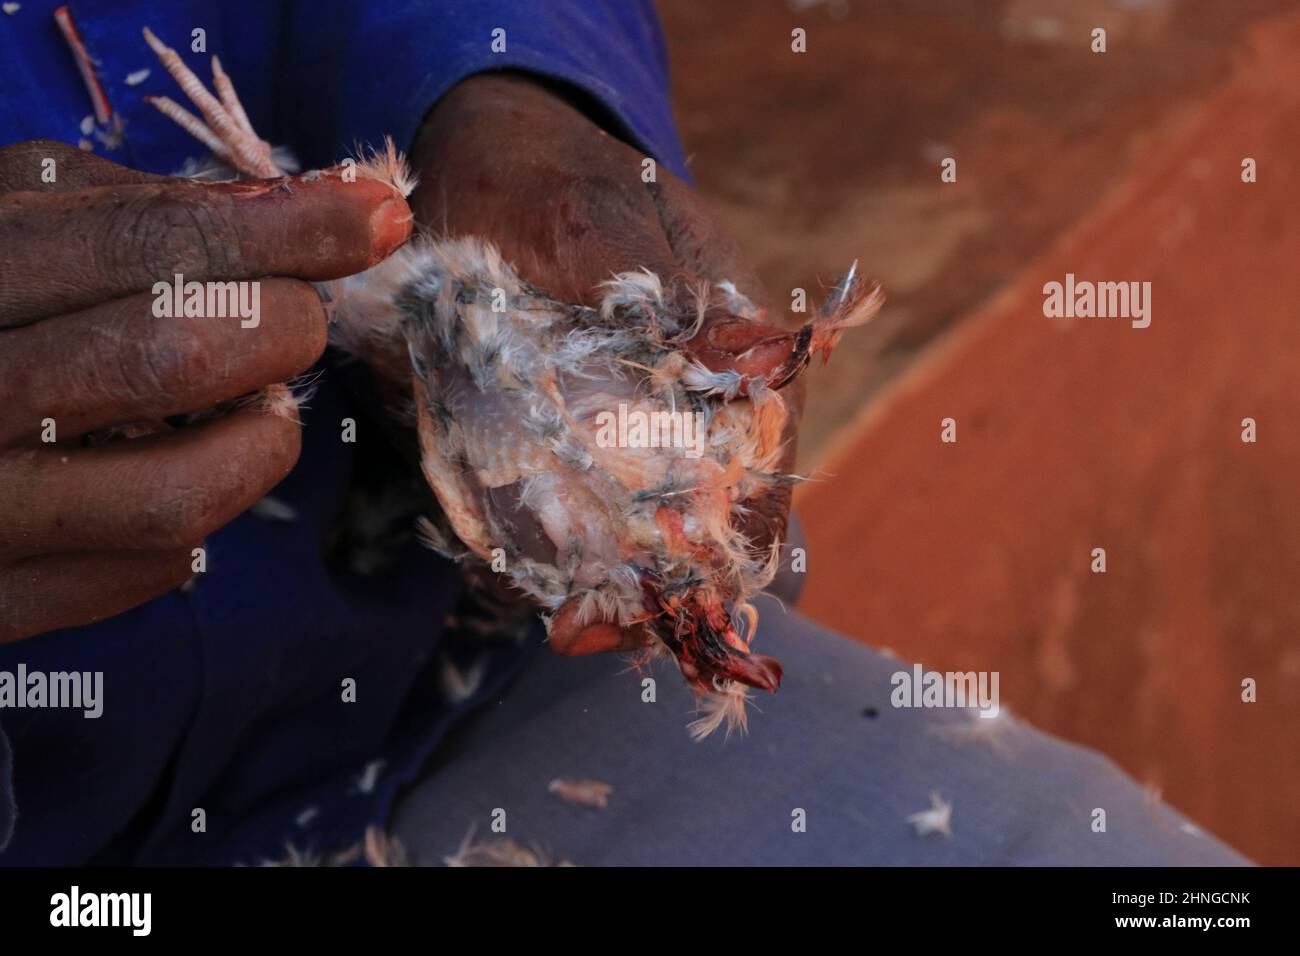 A man is seen plucking feathers  off a quail bird in Malingunde, Malawi. Quails are a delicacy in the country. Malawi. Stock Photo